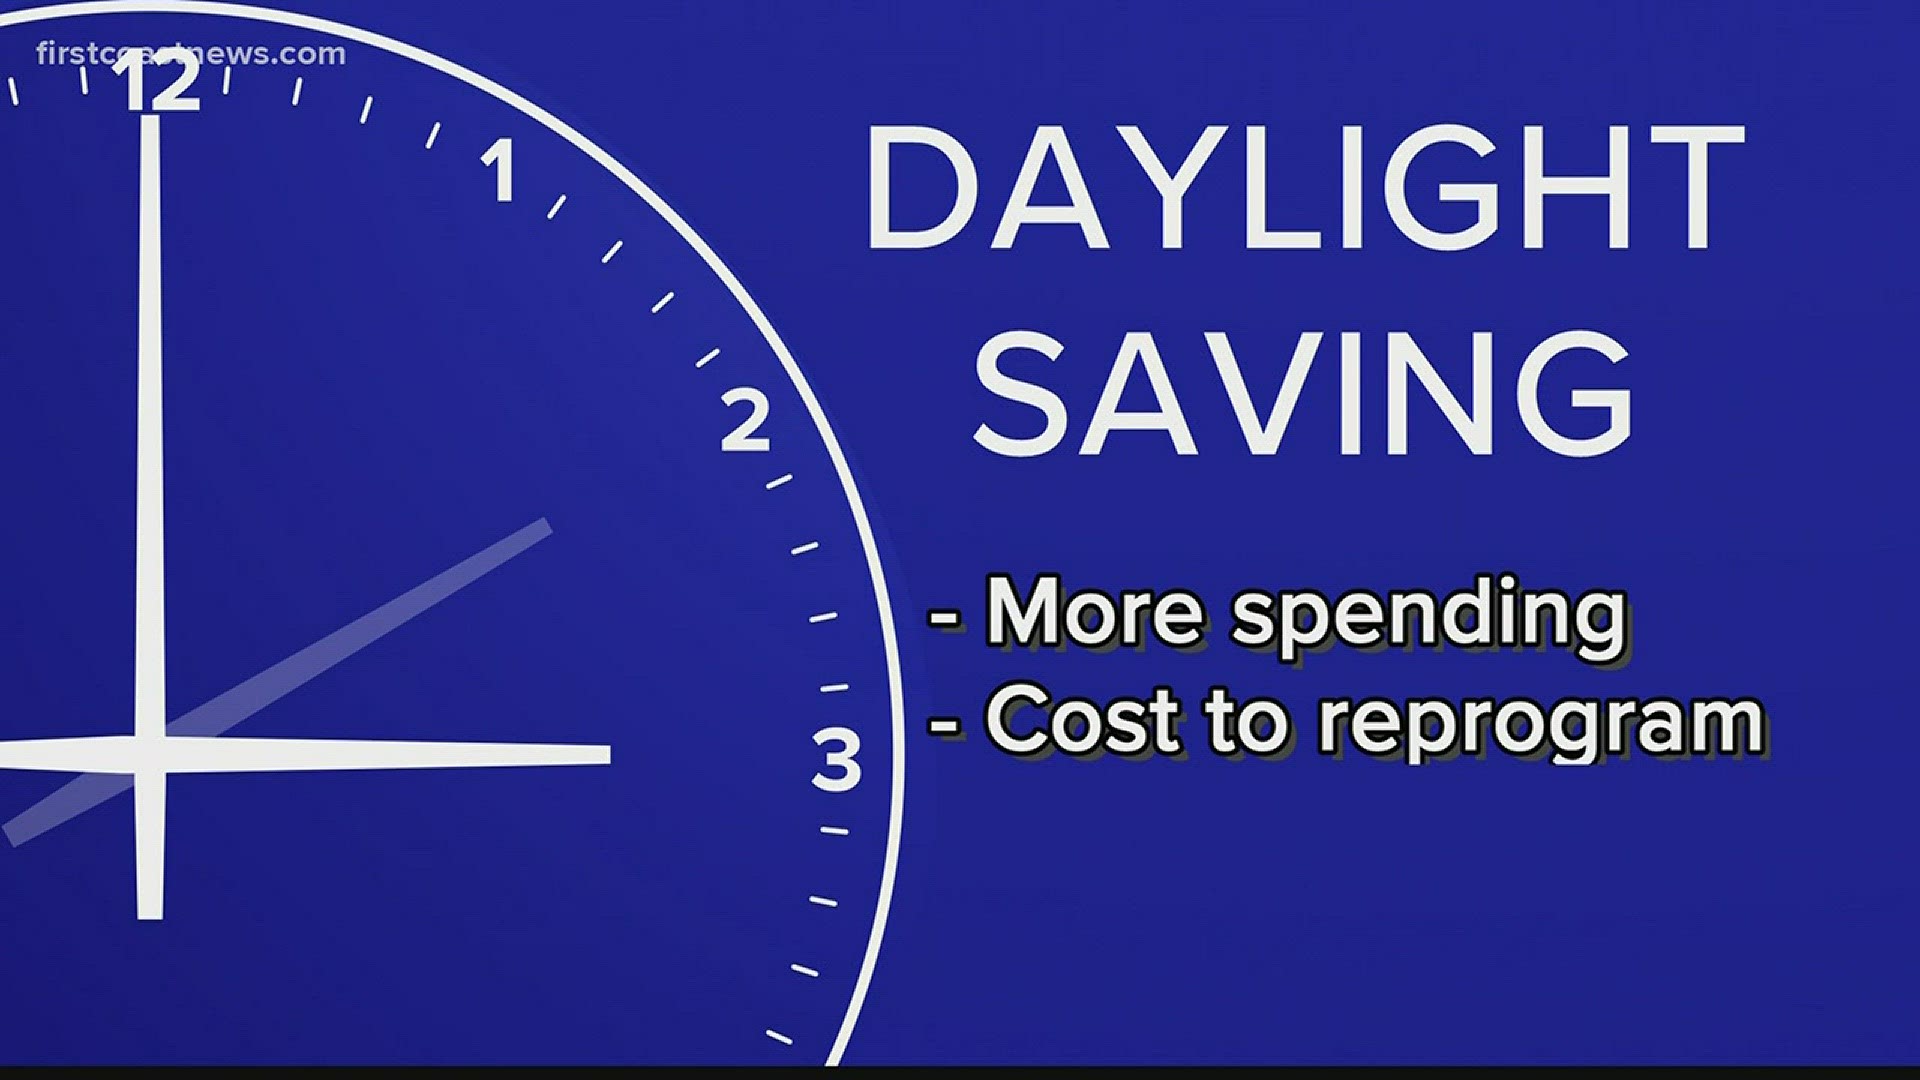 Congress must approve the bill before Florida can practice year-round daylight saving time.